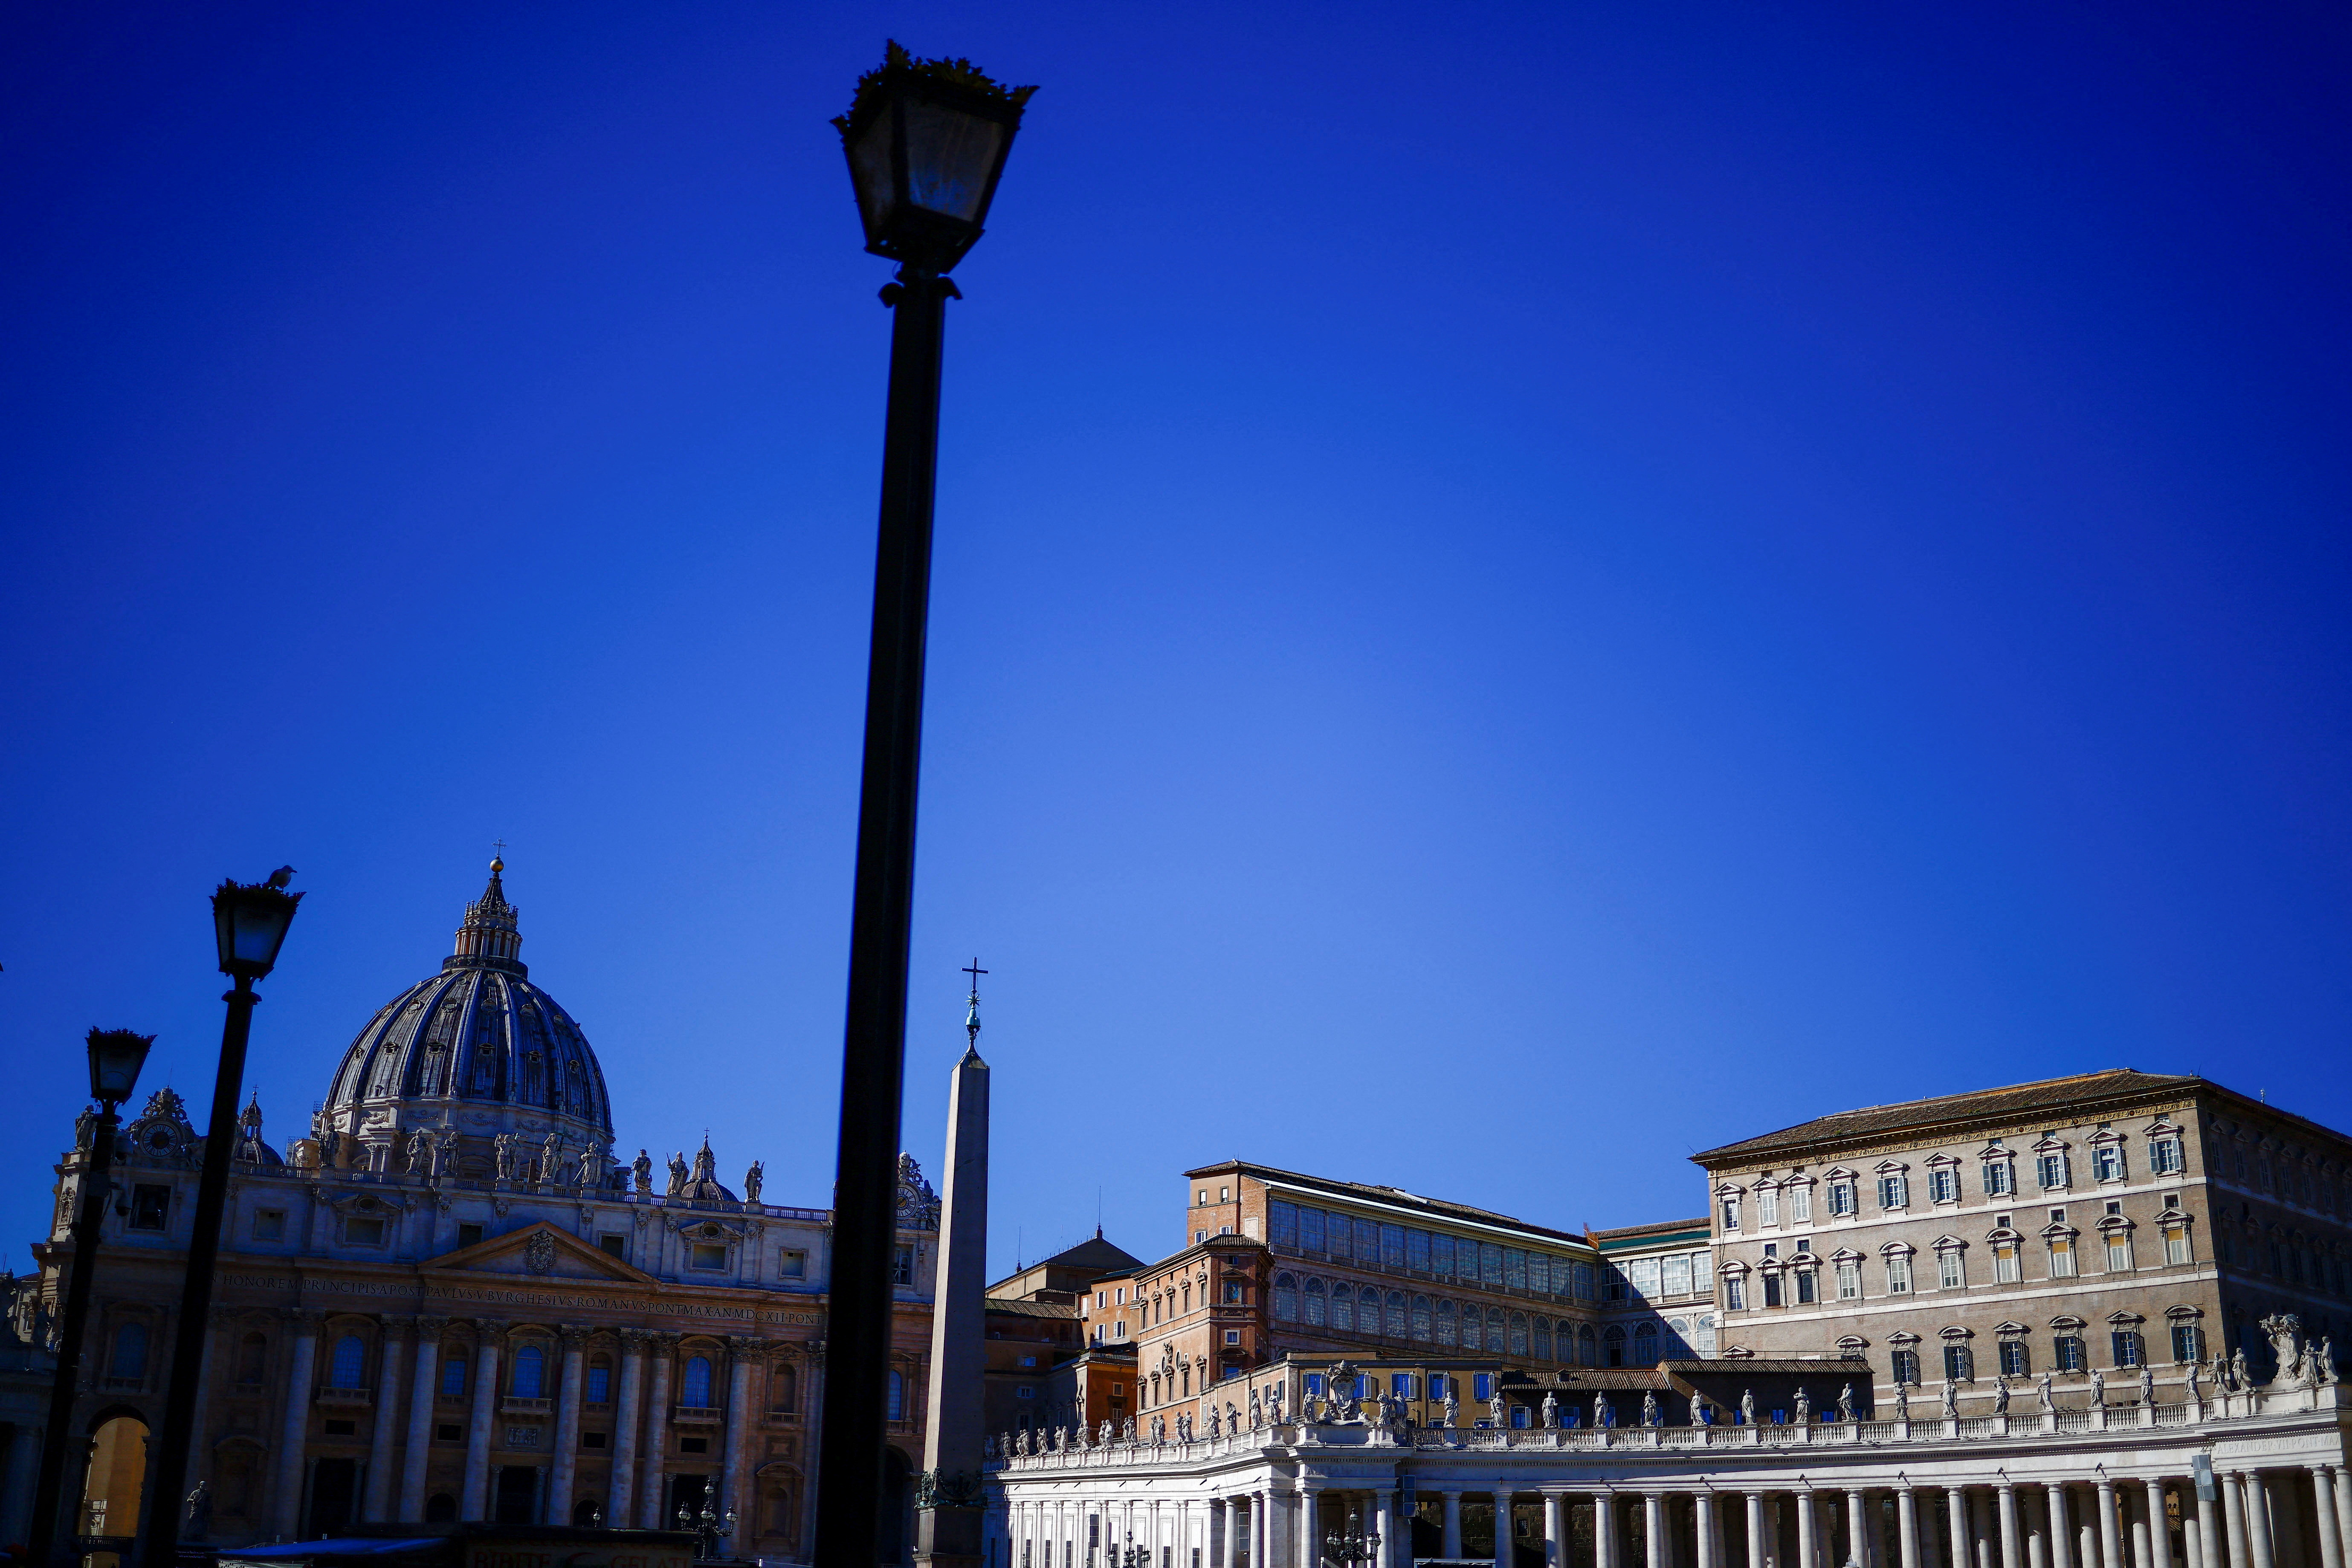 General view of St. Peter's Basilica and the Apostolic Palace on the day former Pope Benedict acknowledged that errors occurred in the handling of sexual abuse cases while he was Archbishop of Munich